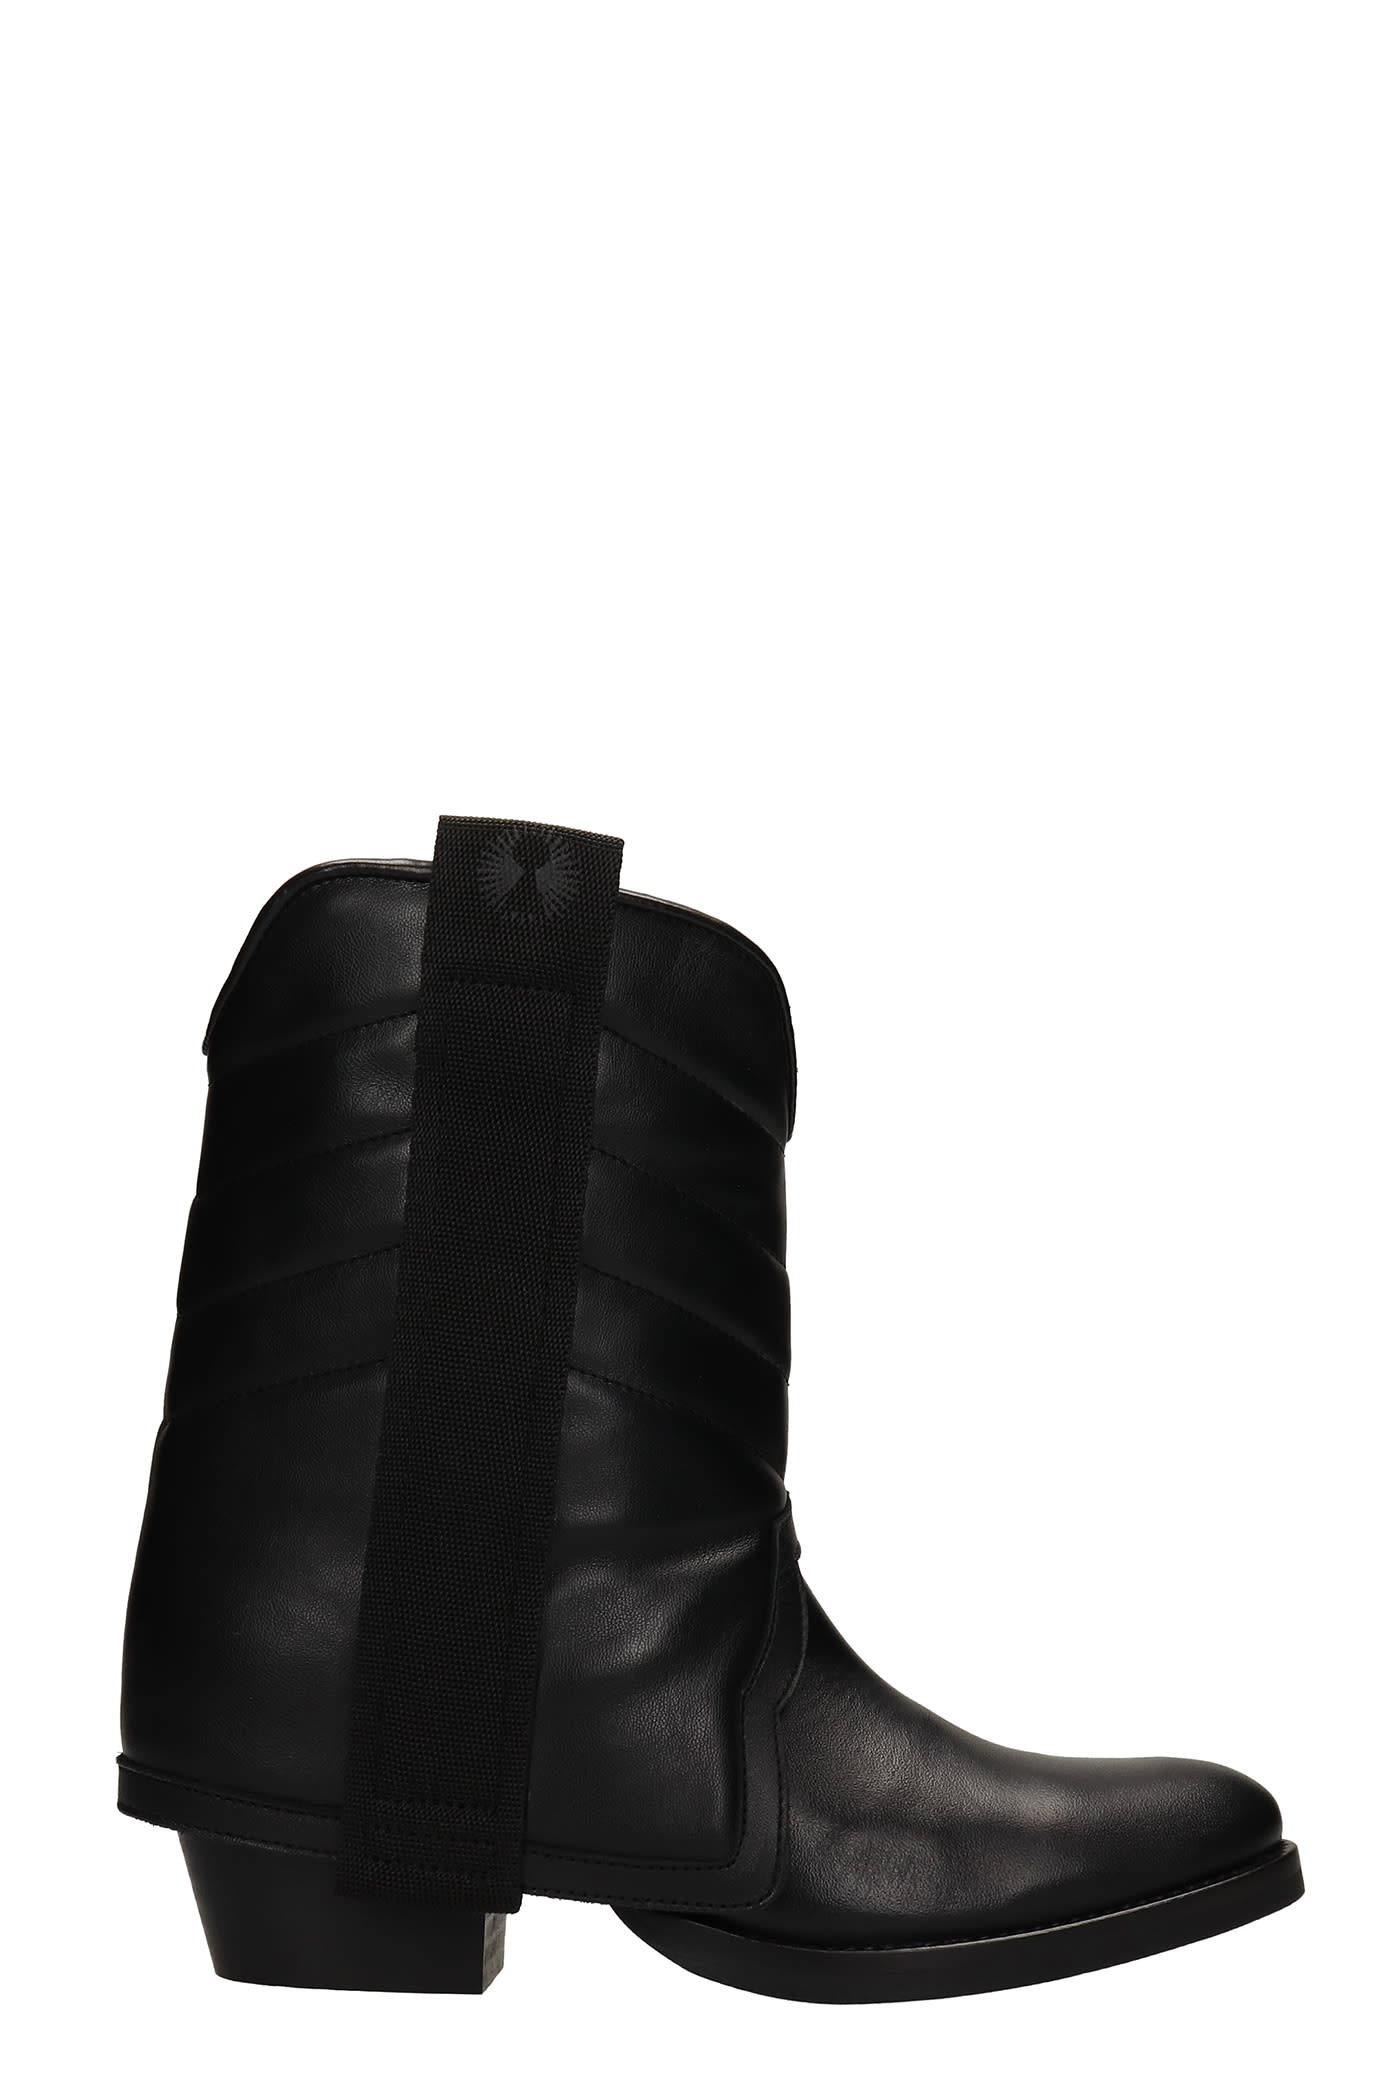 Bruno Bordese Ross Pud Texan Ankle Boots In Black Leather